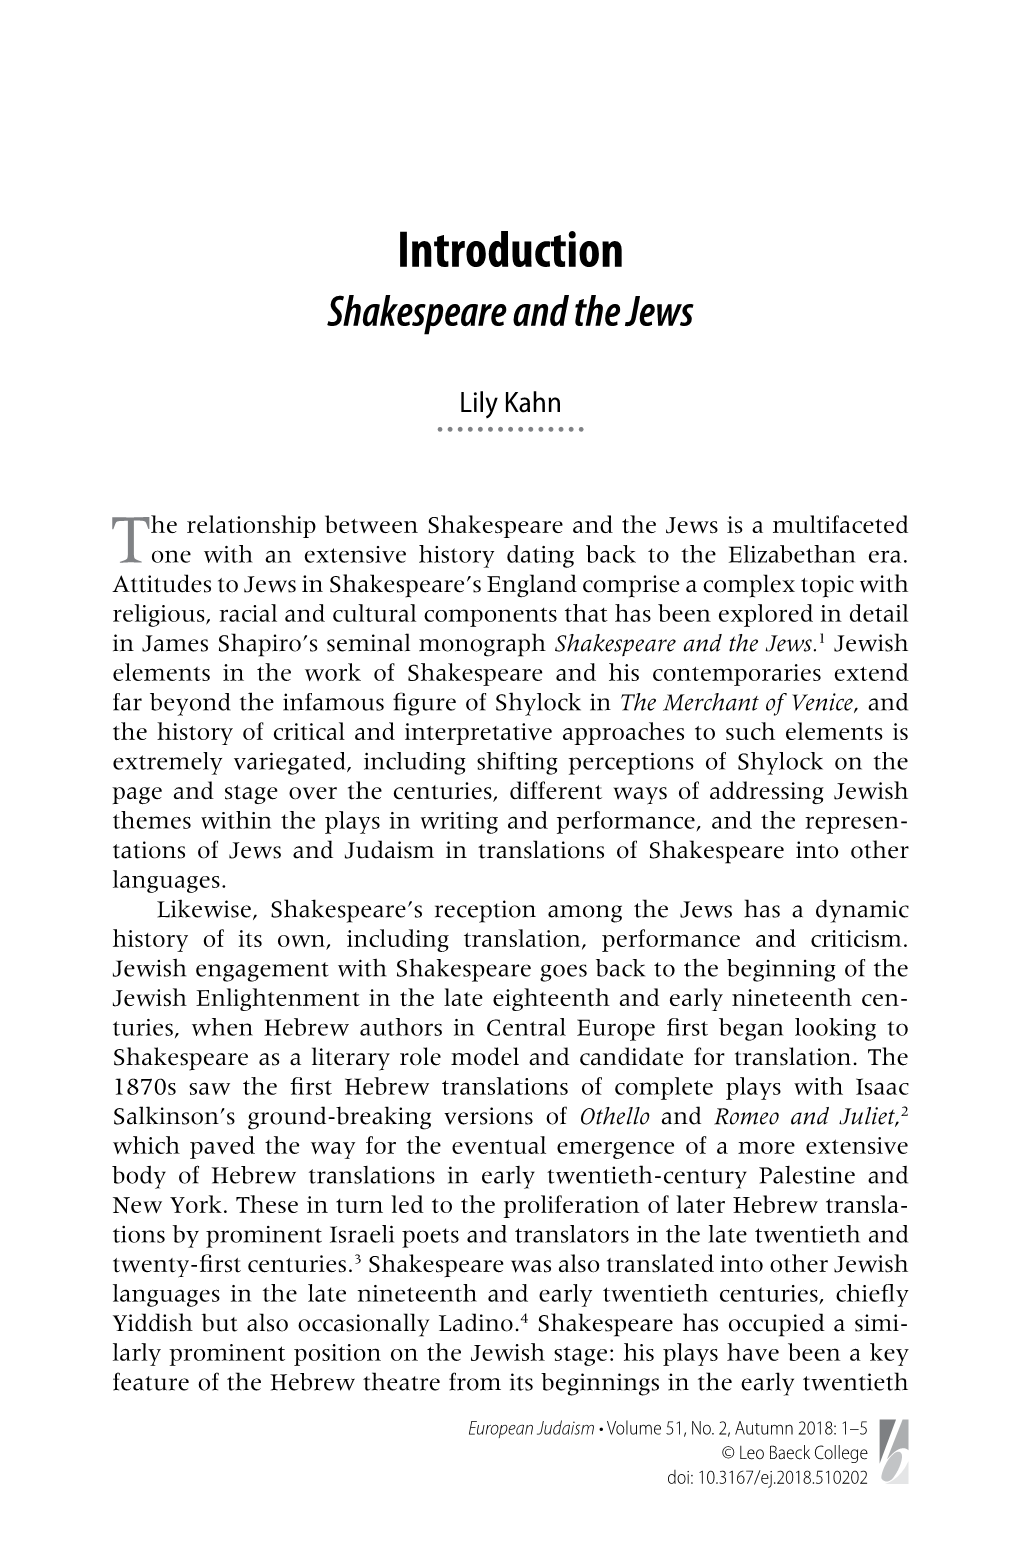 Introduction Shakespeare and the Jews